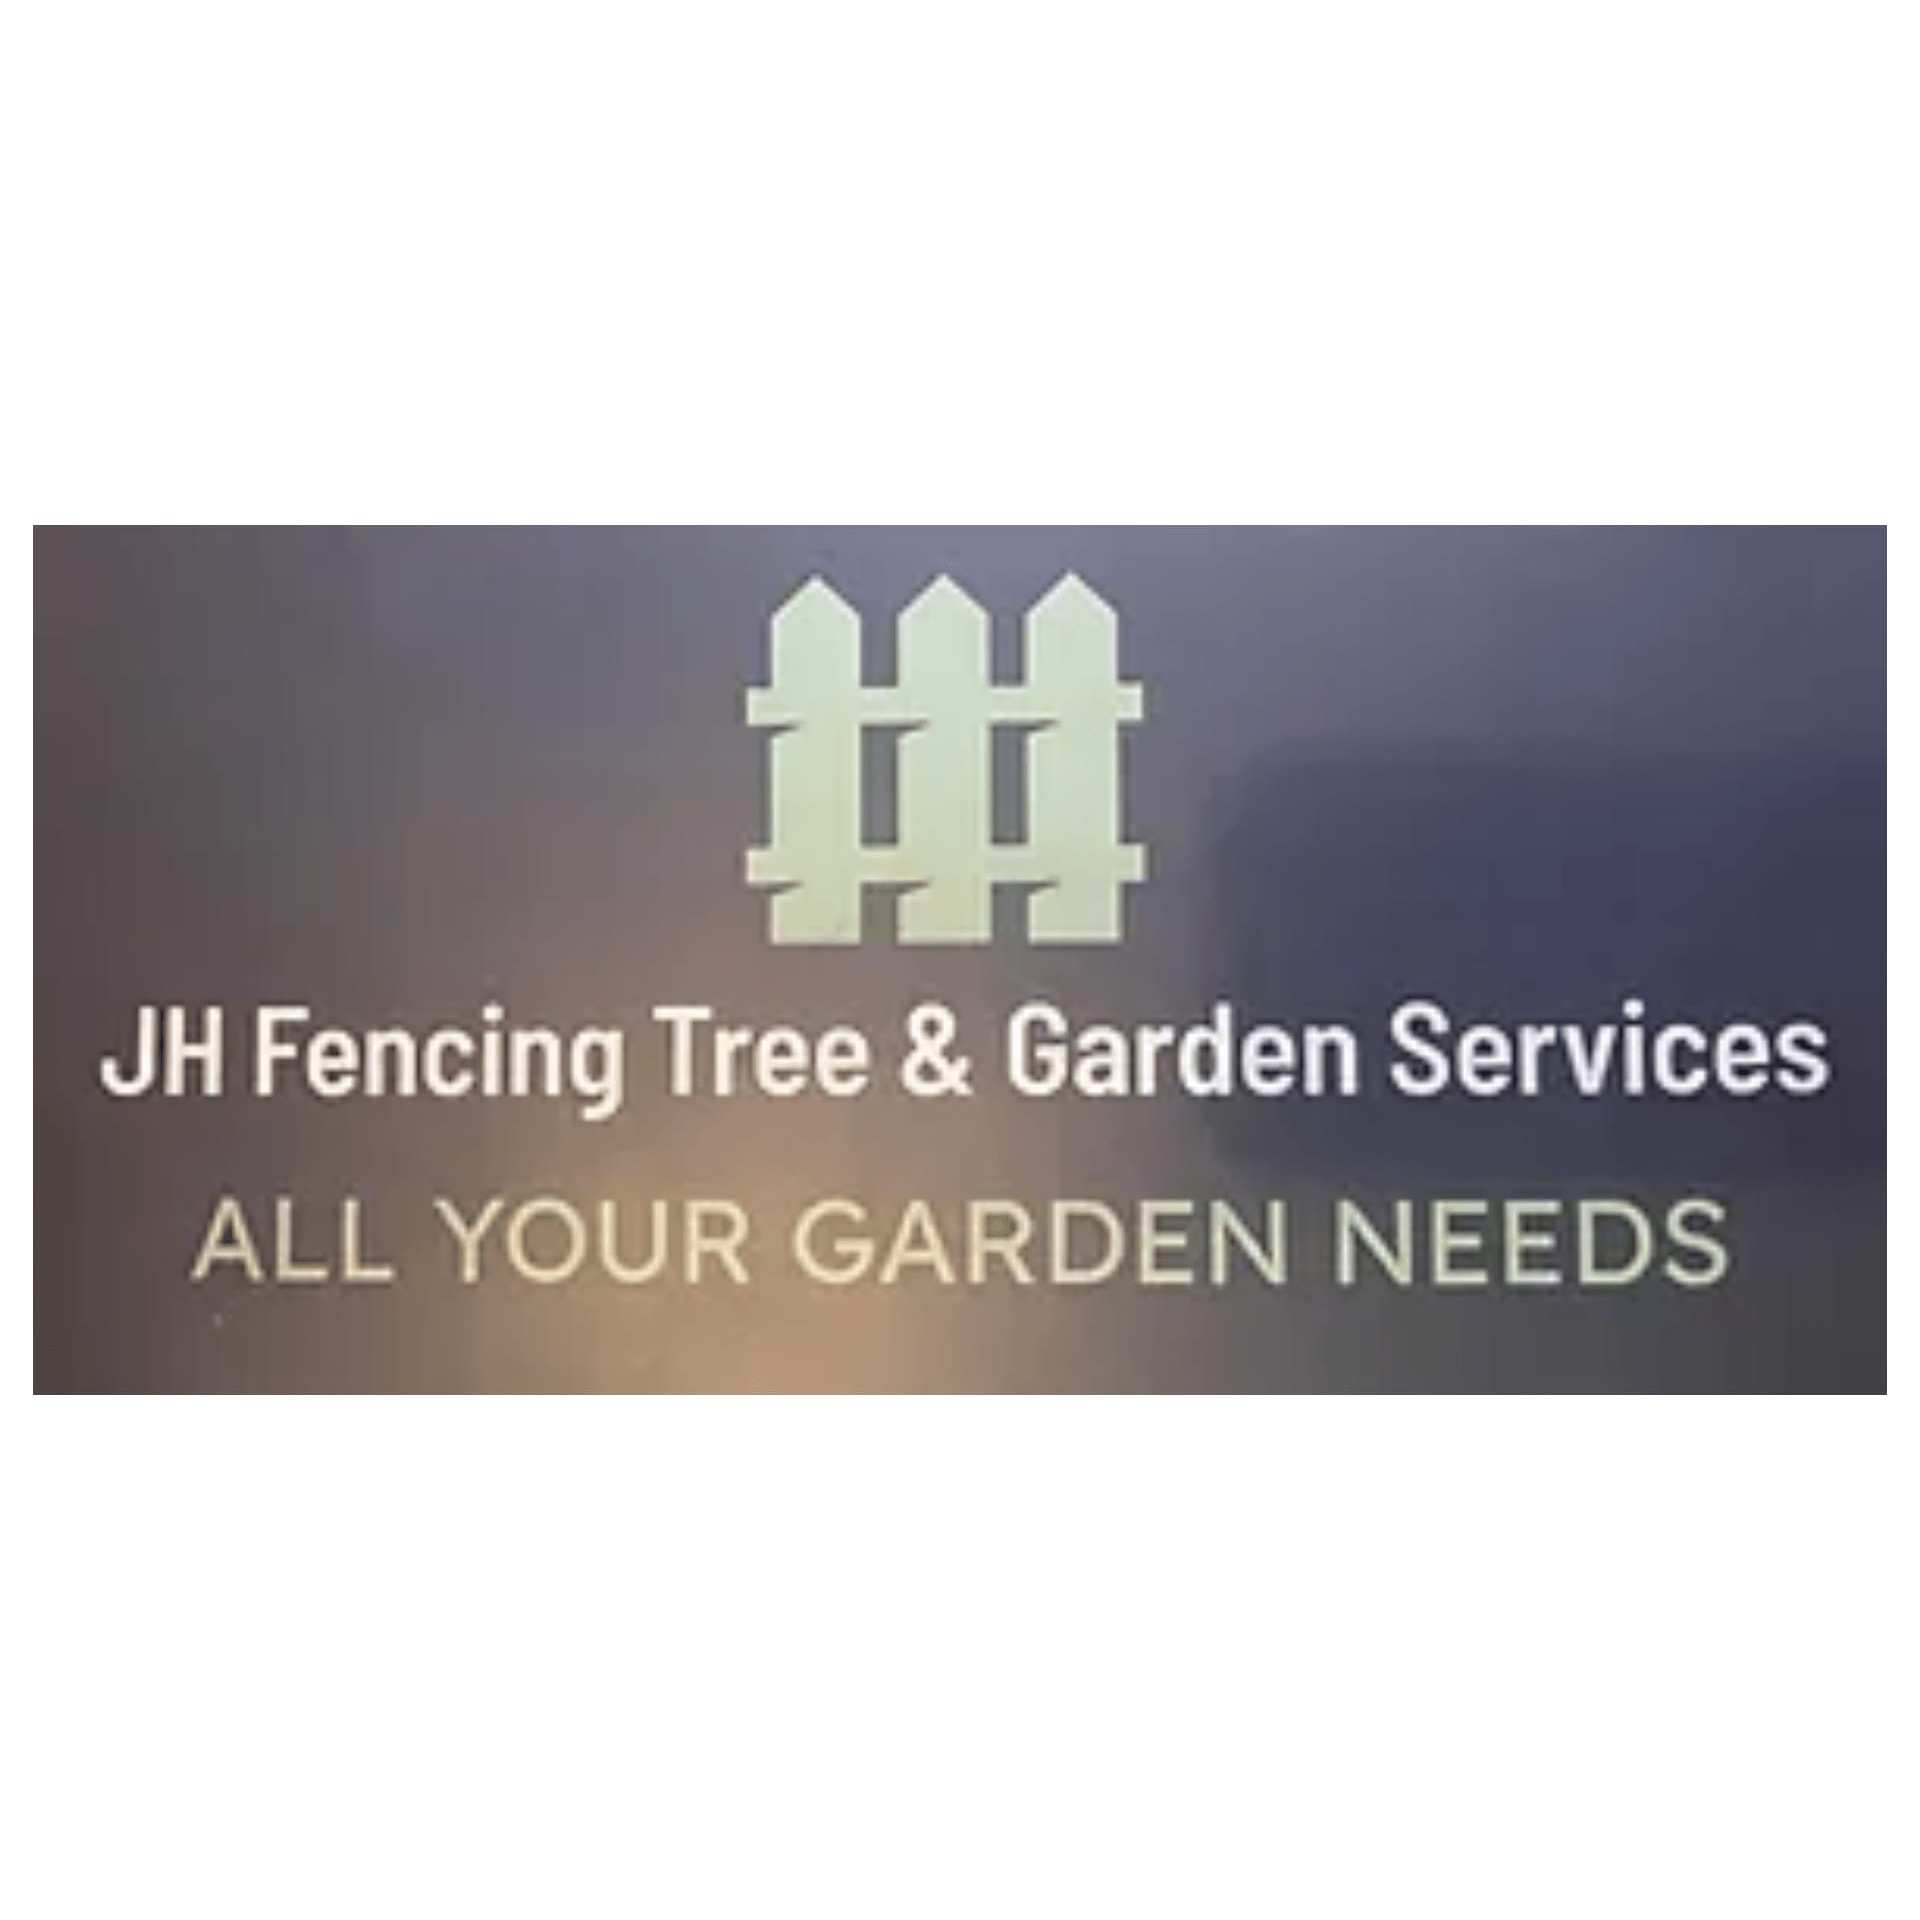 JH Fencing Tree & Garden Services - Bristol, Gloucestershire BS16 9PY - 07733 381731 | ShowMeLocal.com